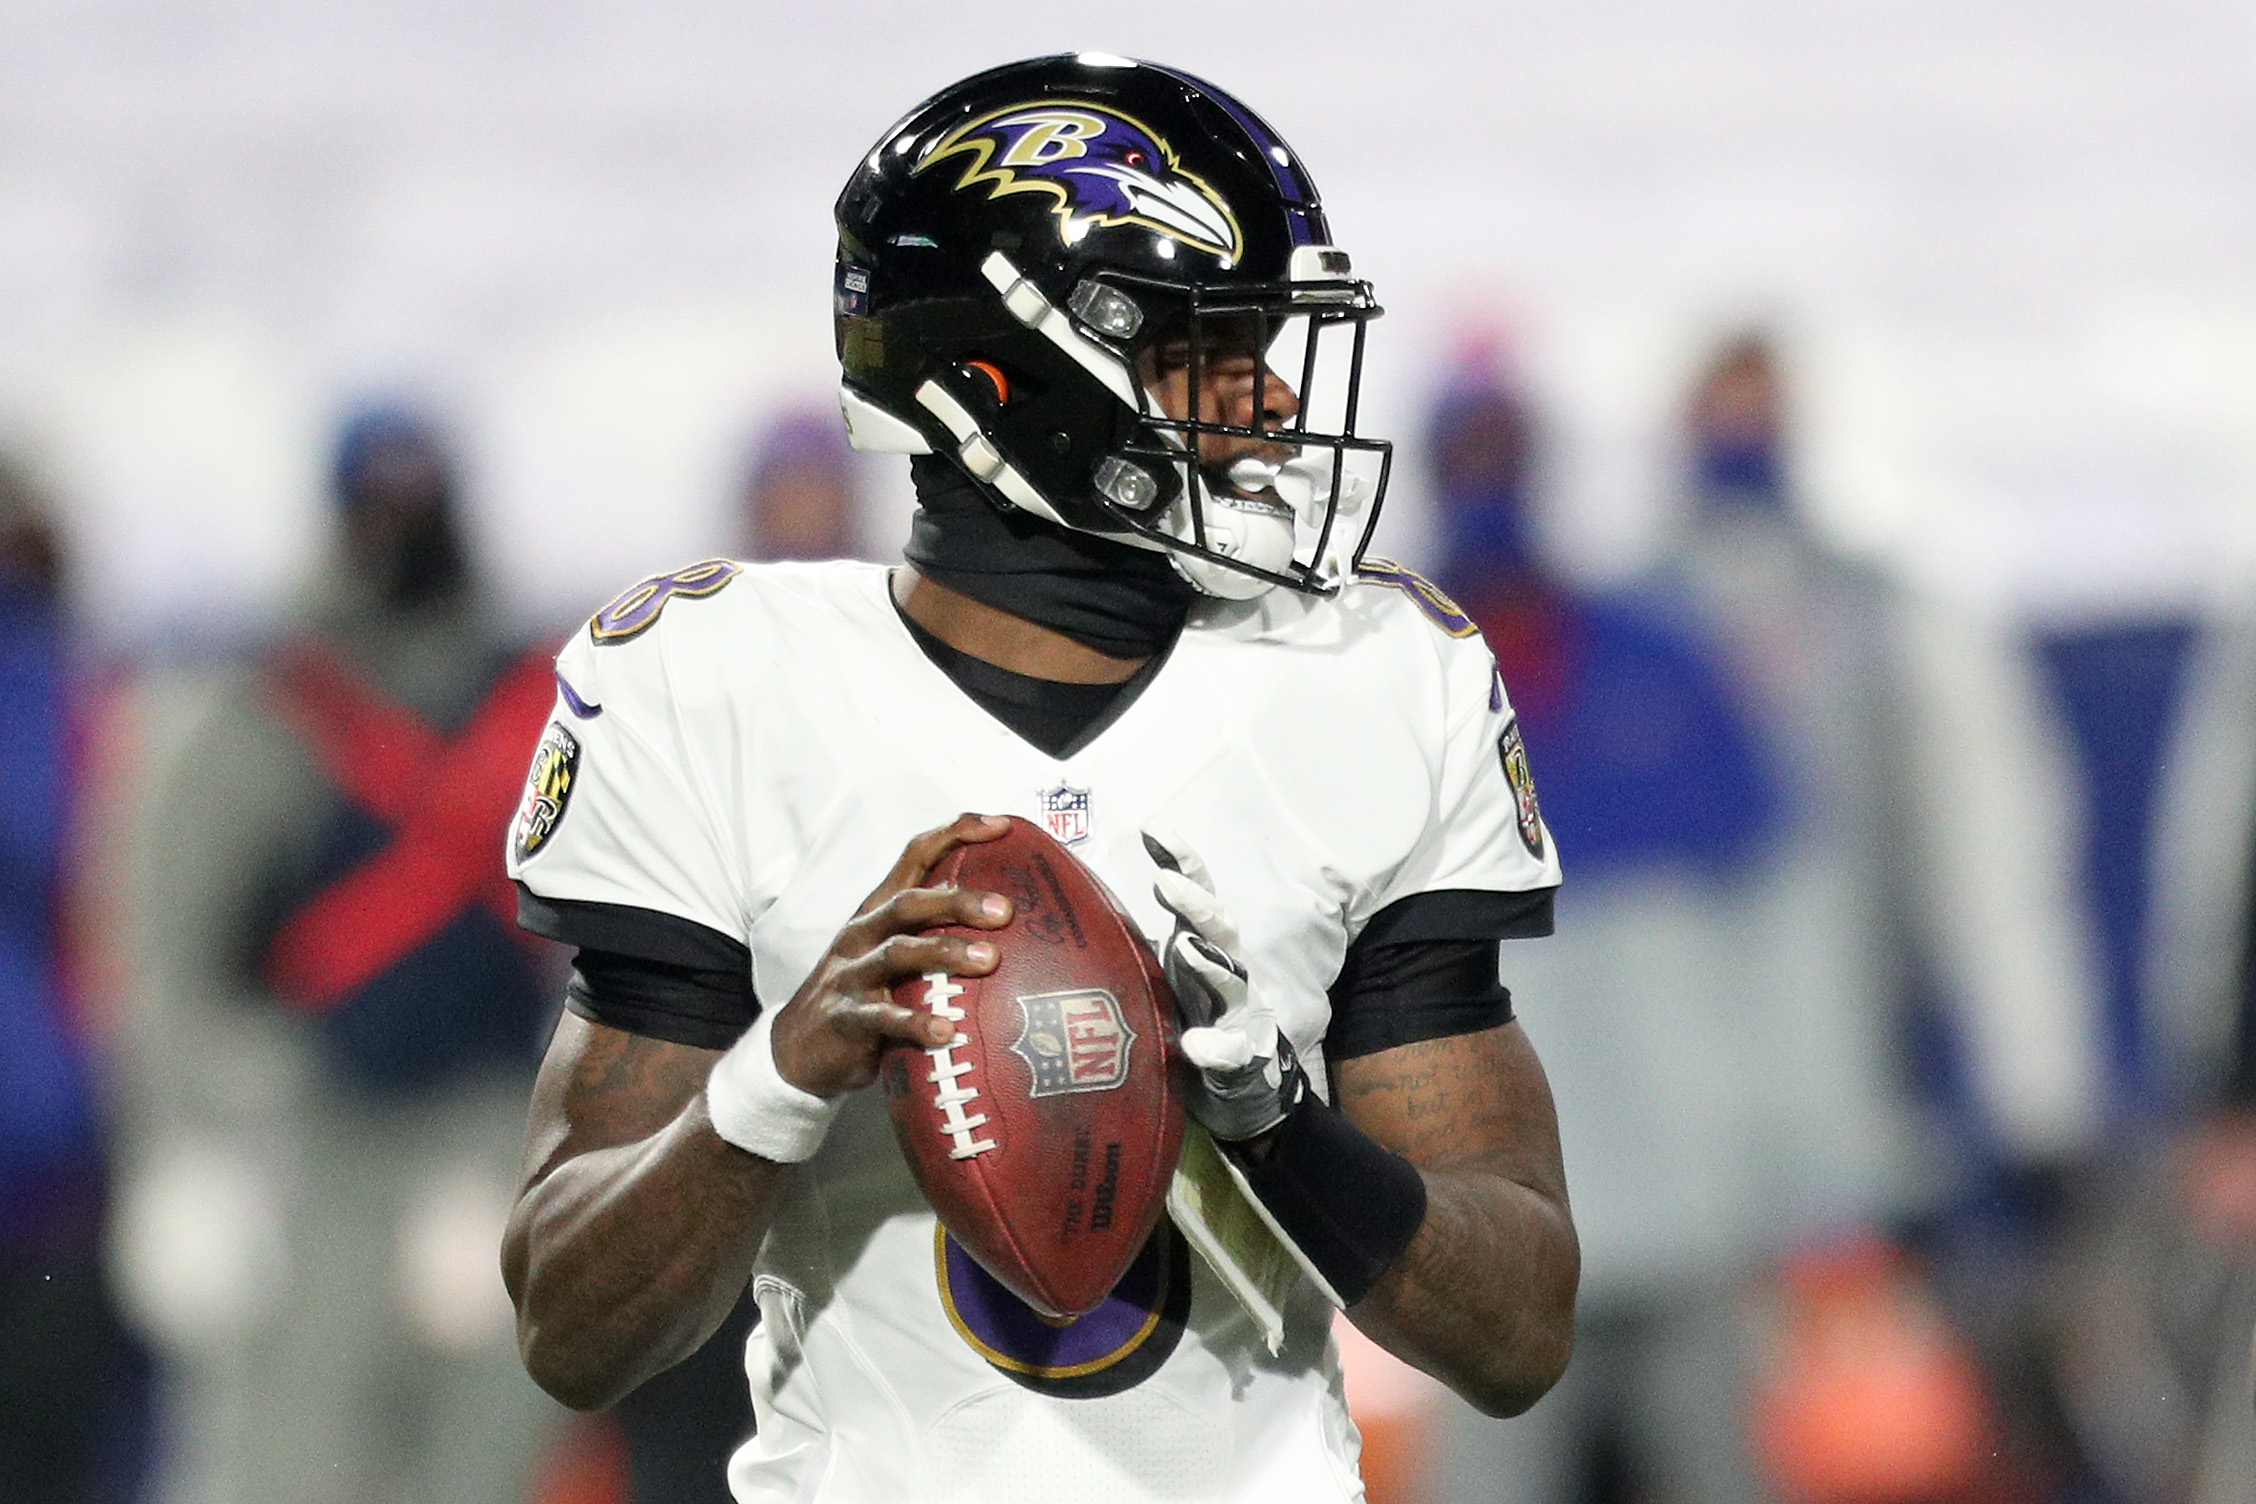 Lamar Jackson Carted Off With Ankle Injury Against Browns